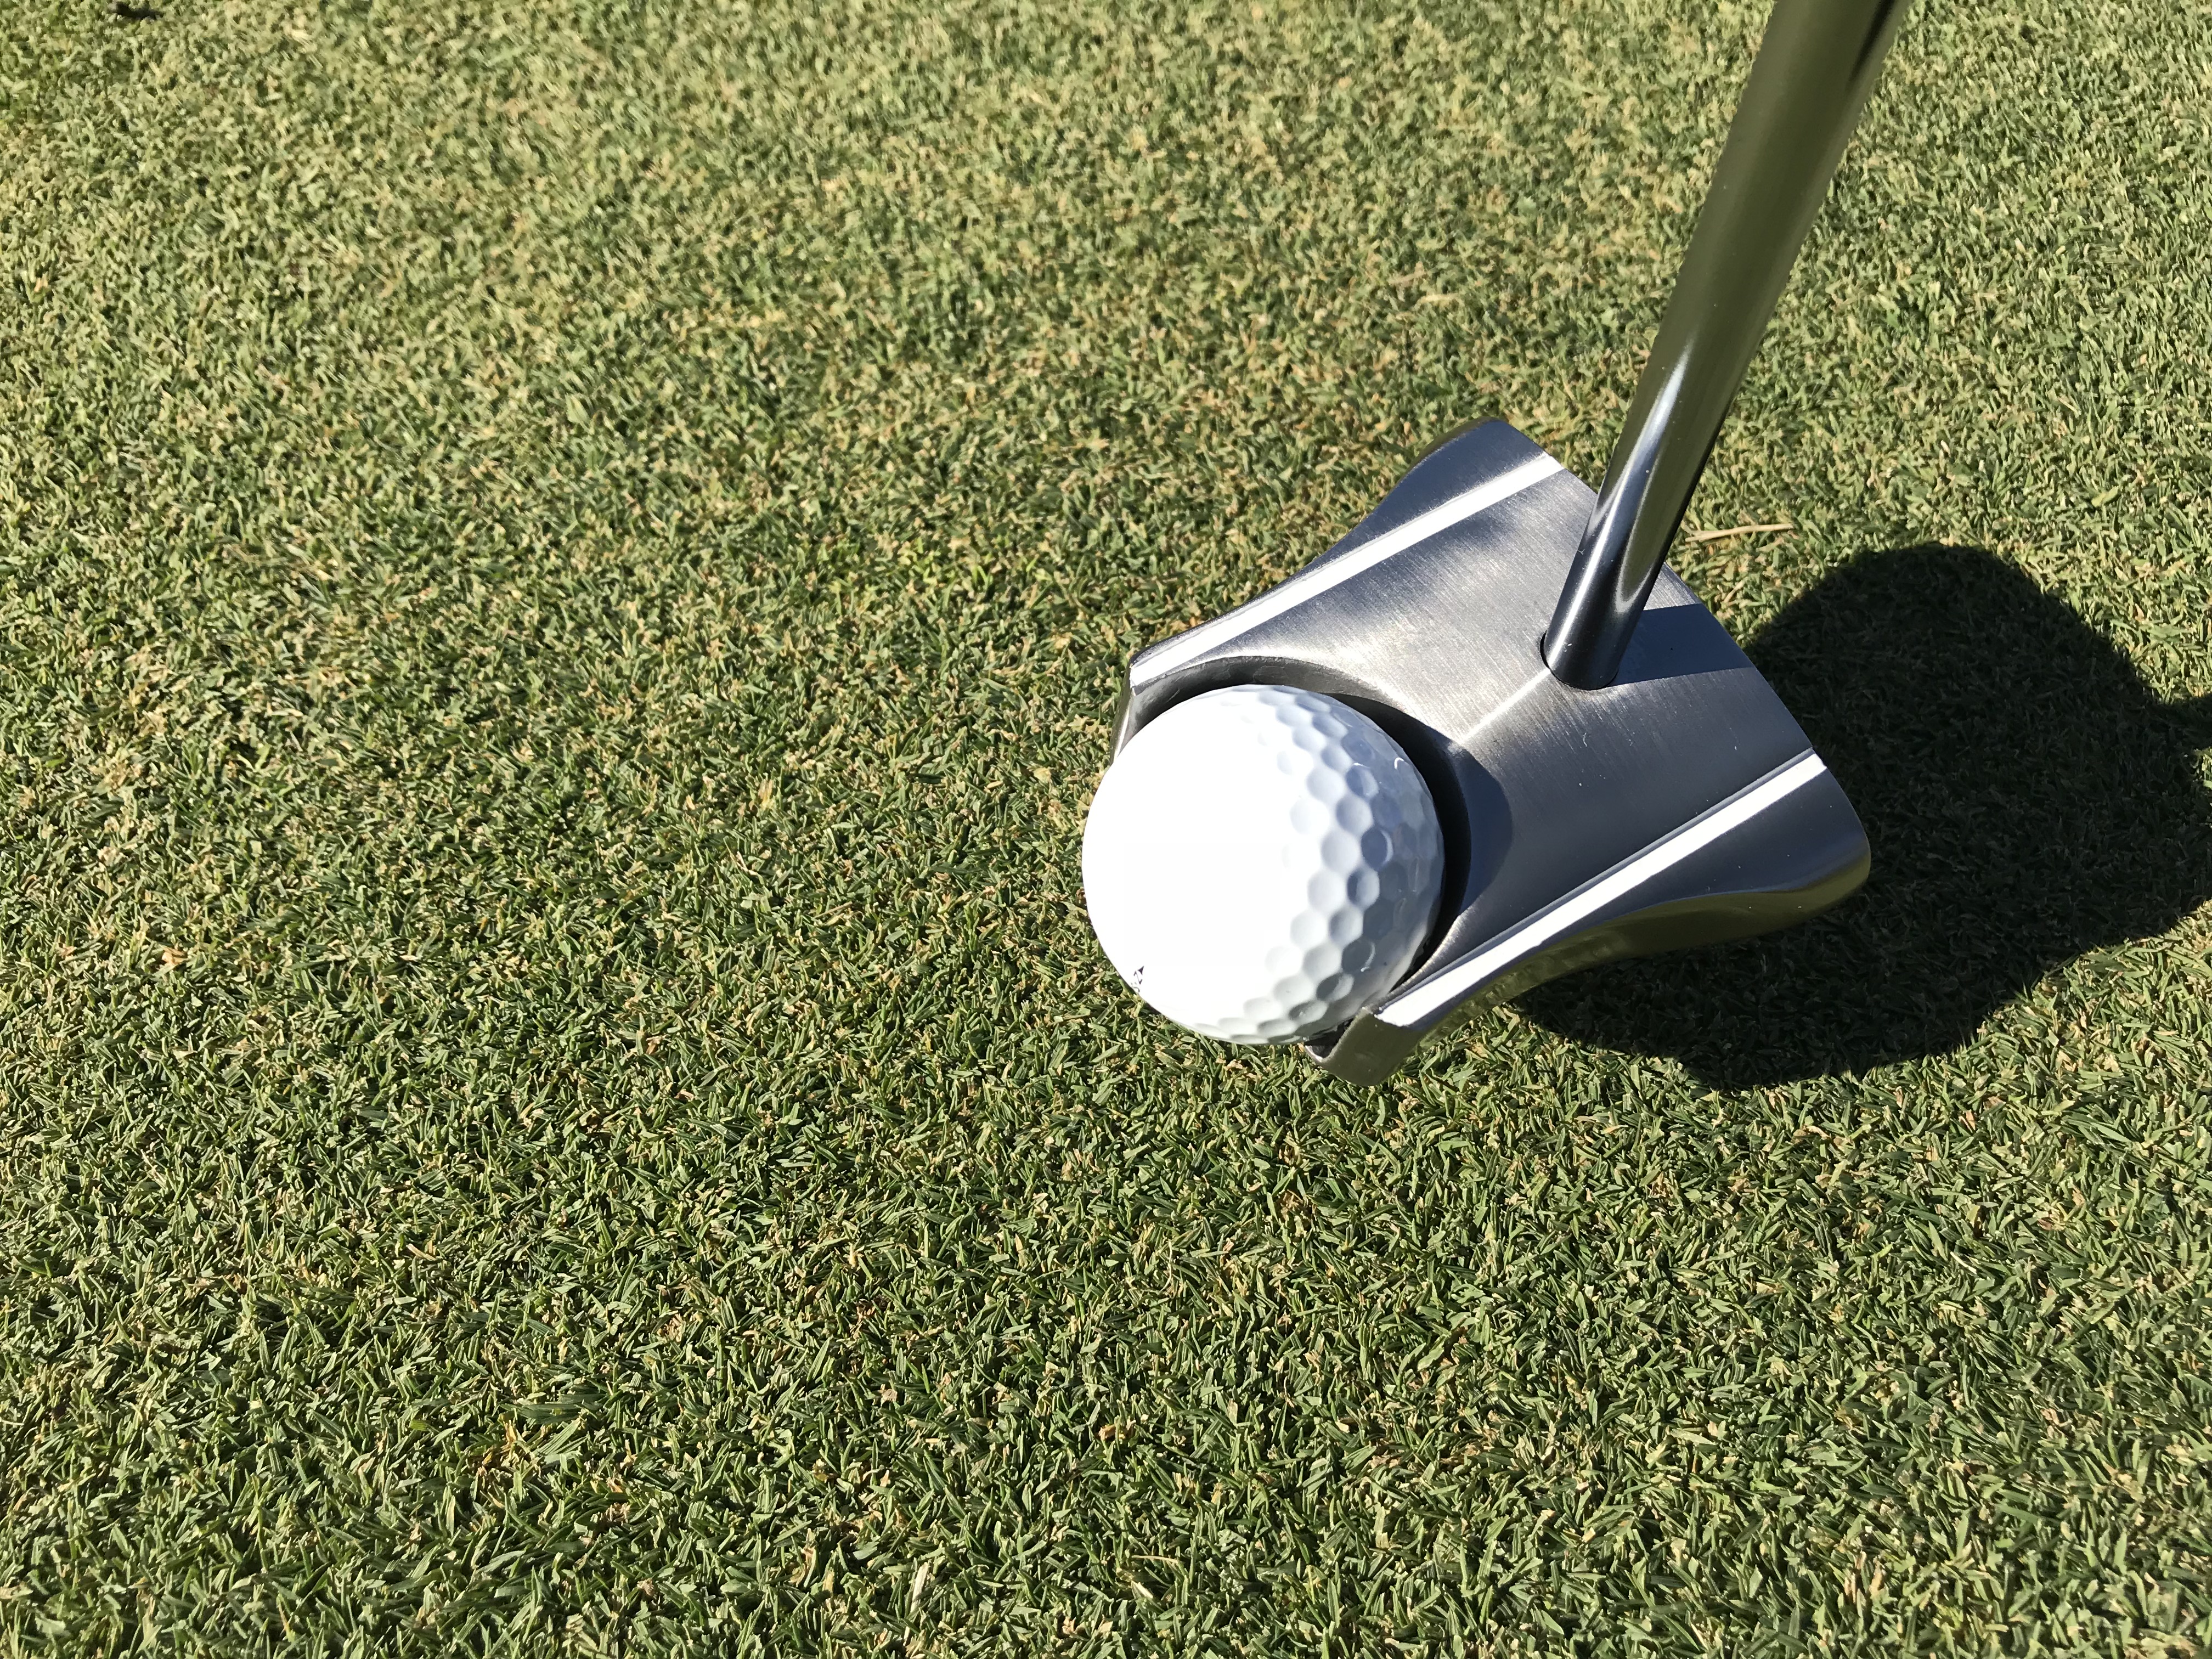 Face on GP Putter - Face On Putting